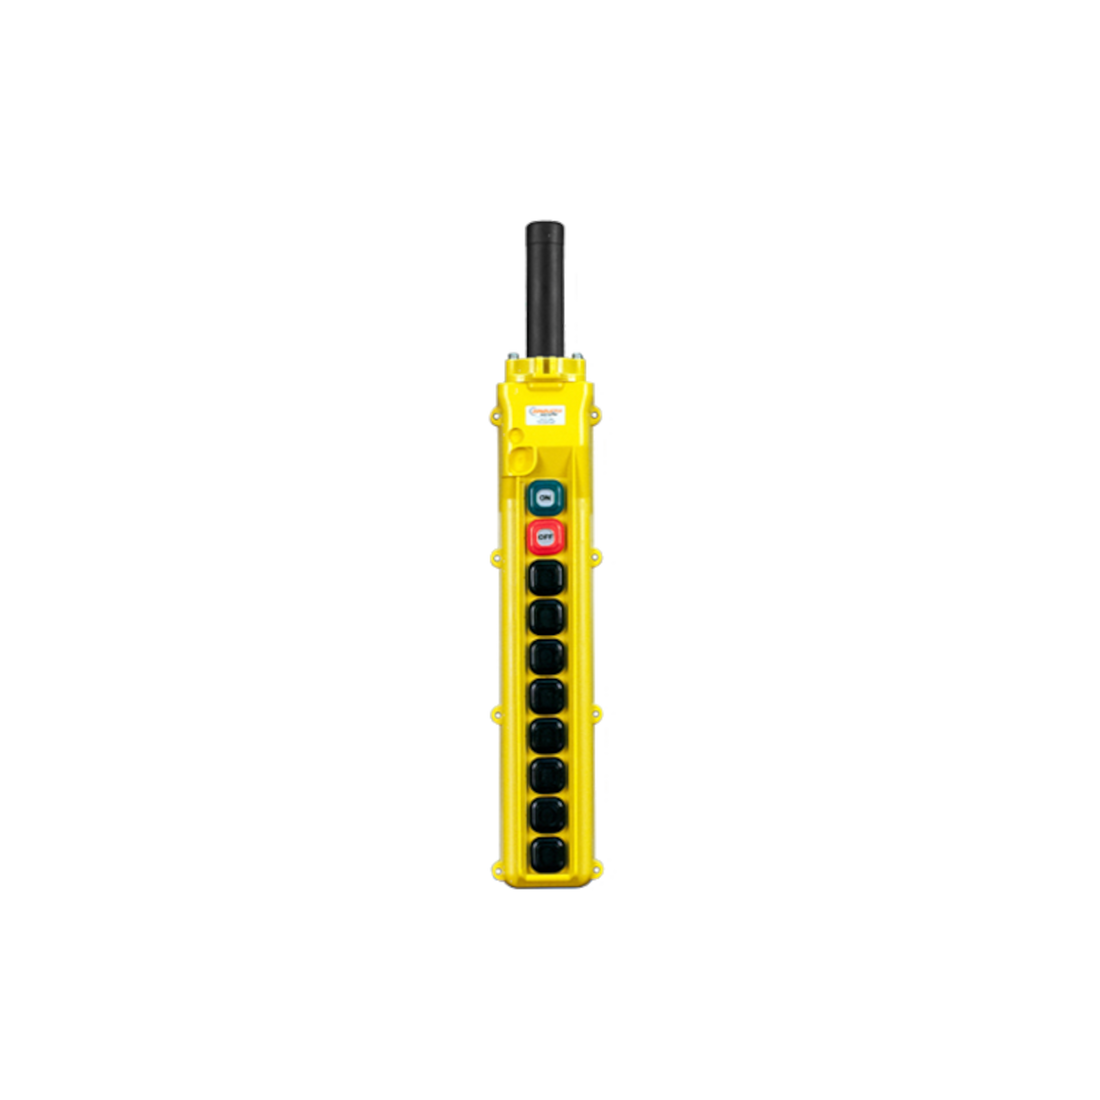 80 Series 10-Button Pendant, 8 Single-, Dual-, Three-Speed Switches with Momentary On/Off (XA-34244, XA-34246, XA-34248); Color: Yellow